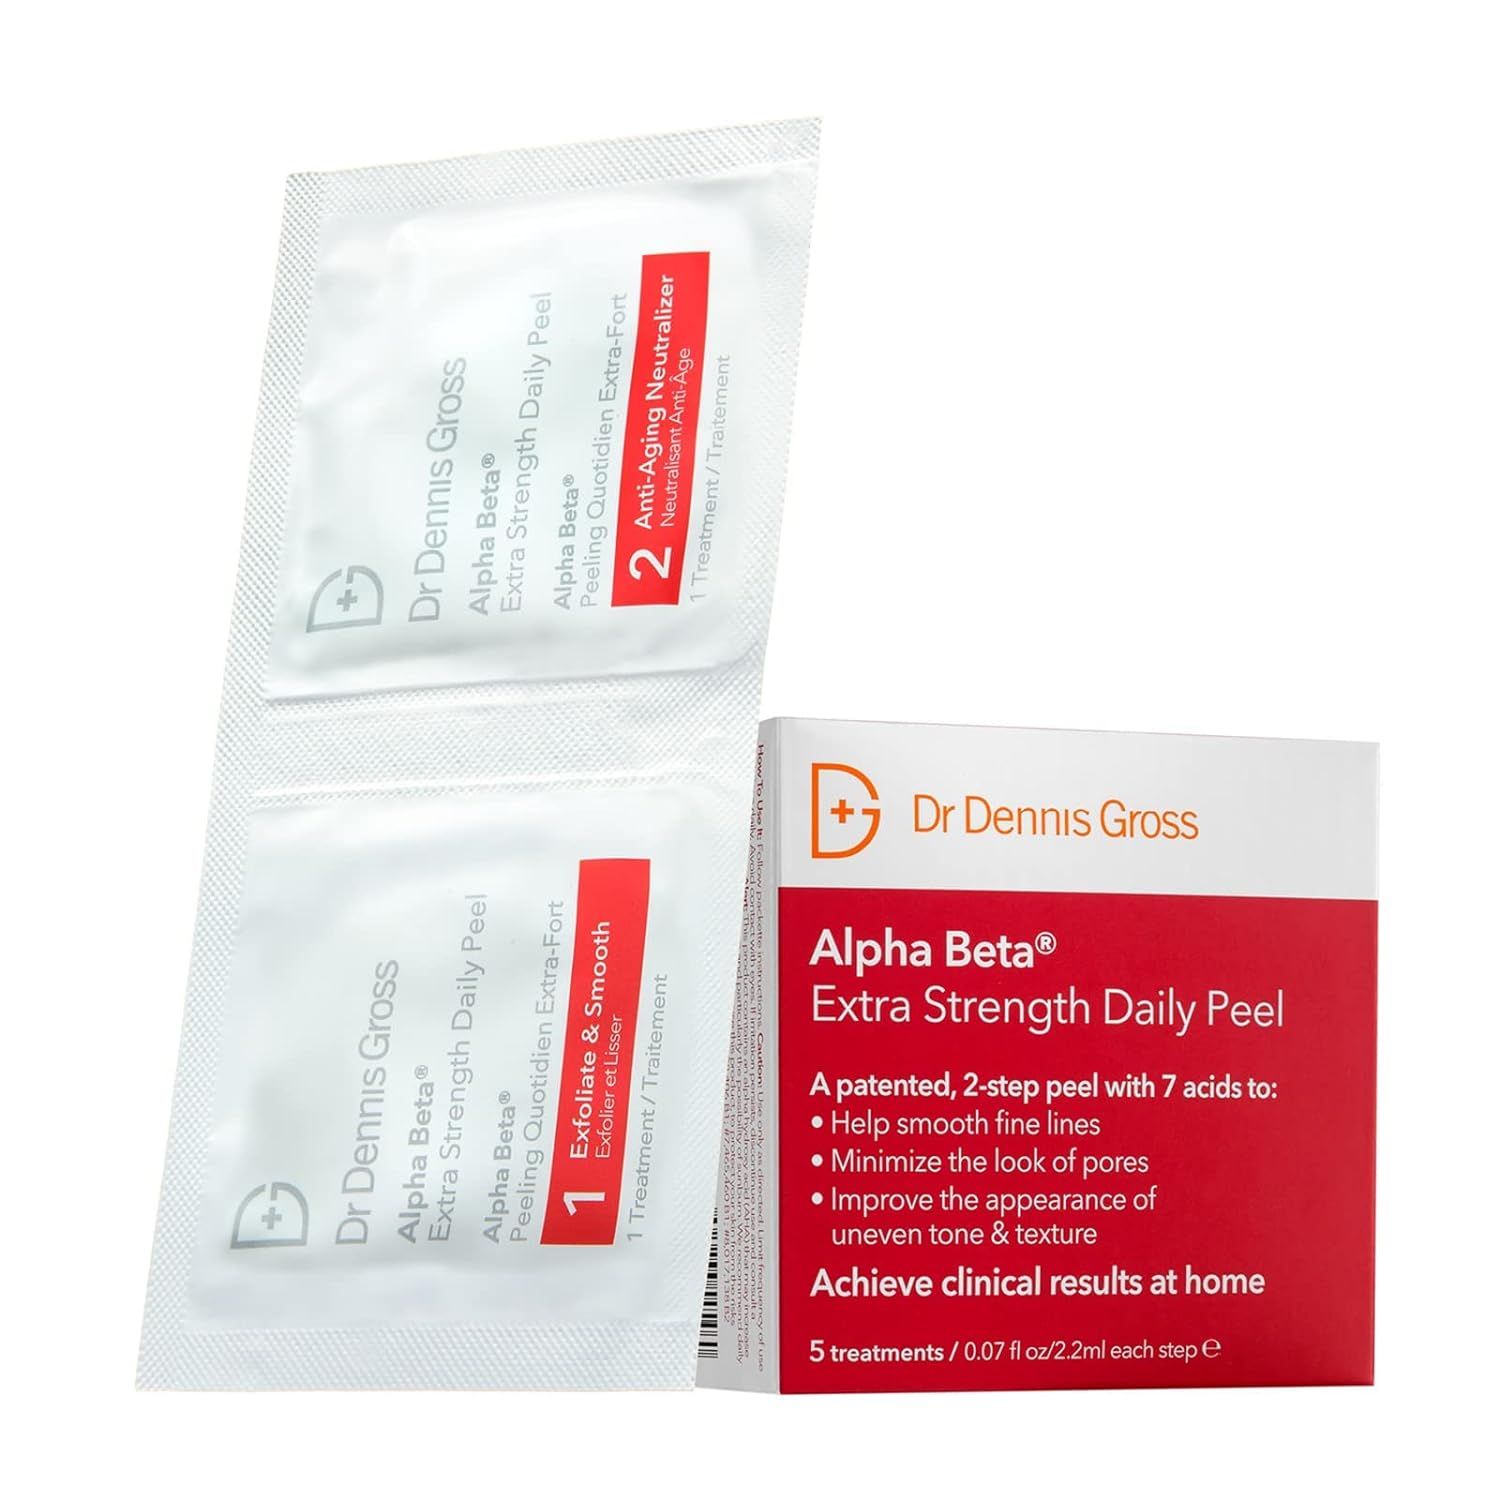 Dr Dennis Gross Alpha Beta Extra Strength Daily Peel | 2 Step Daily Treatment to Boost Radiance, ... | Amazon (US)